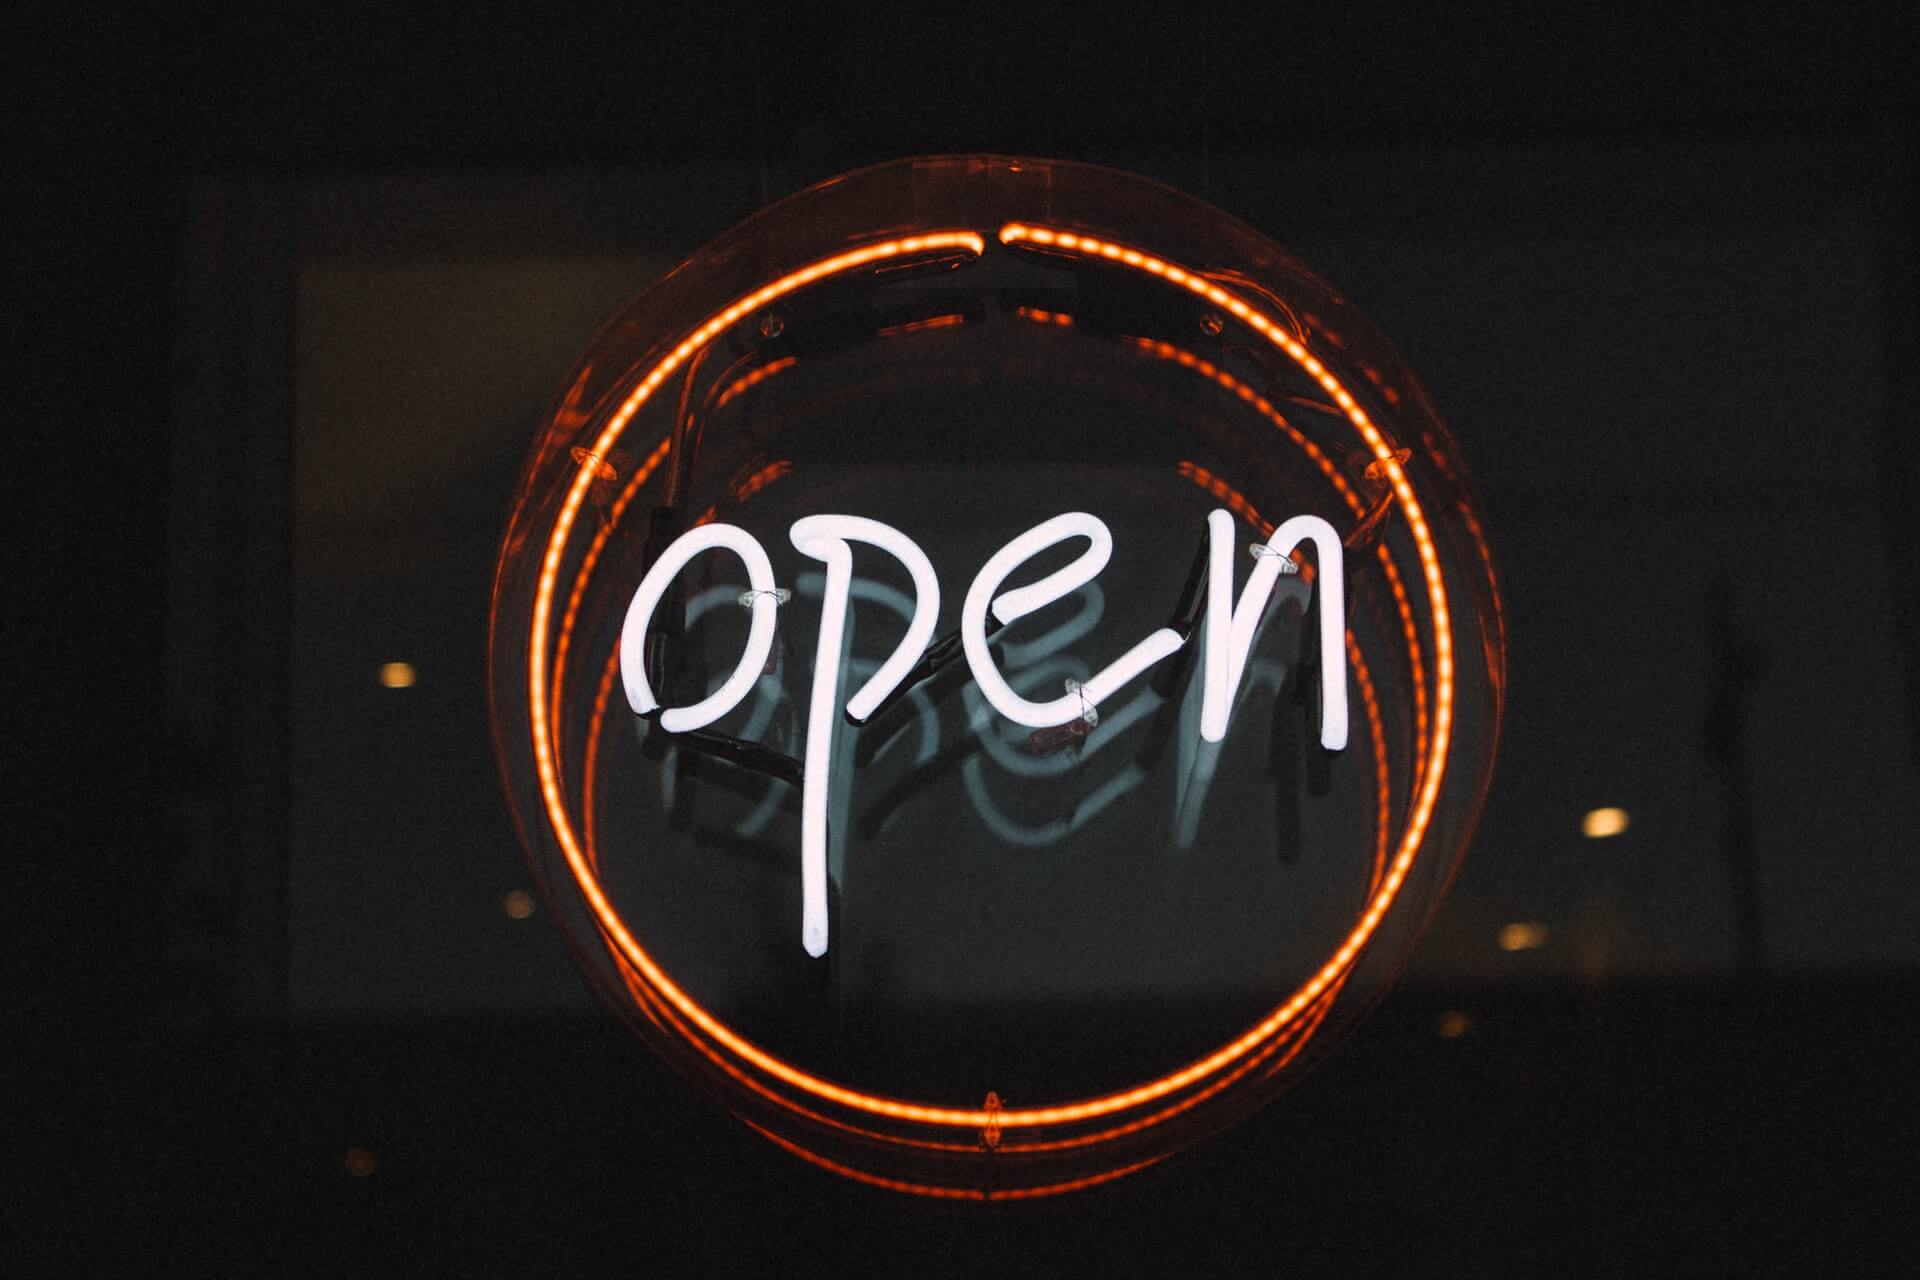 Lower-case neon open sign